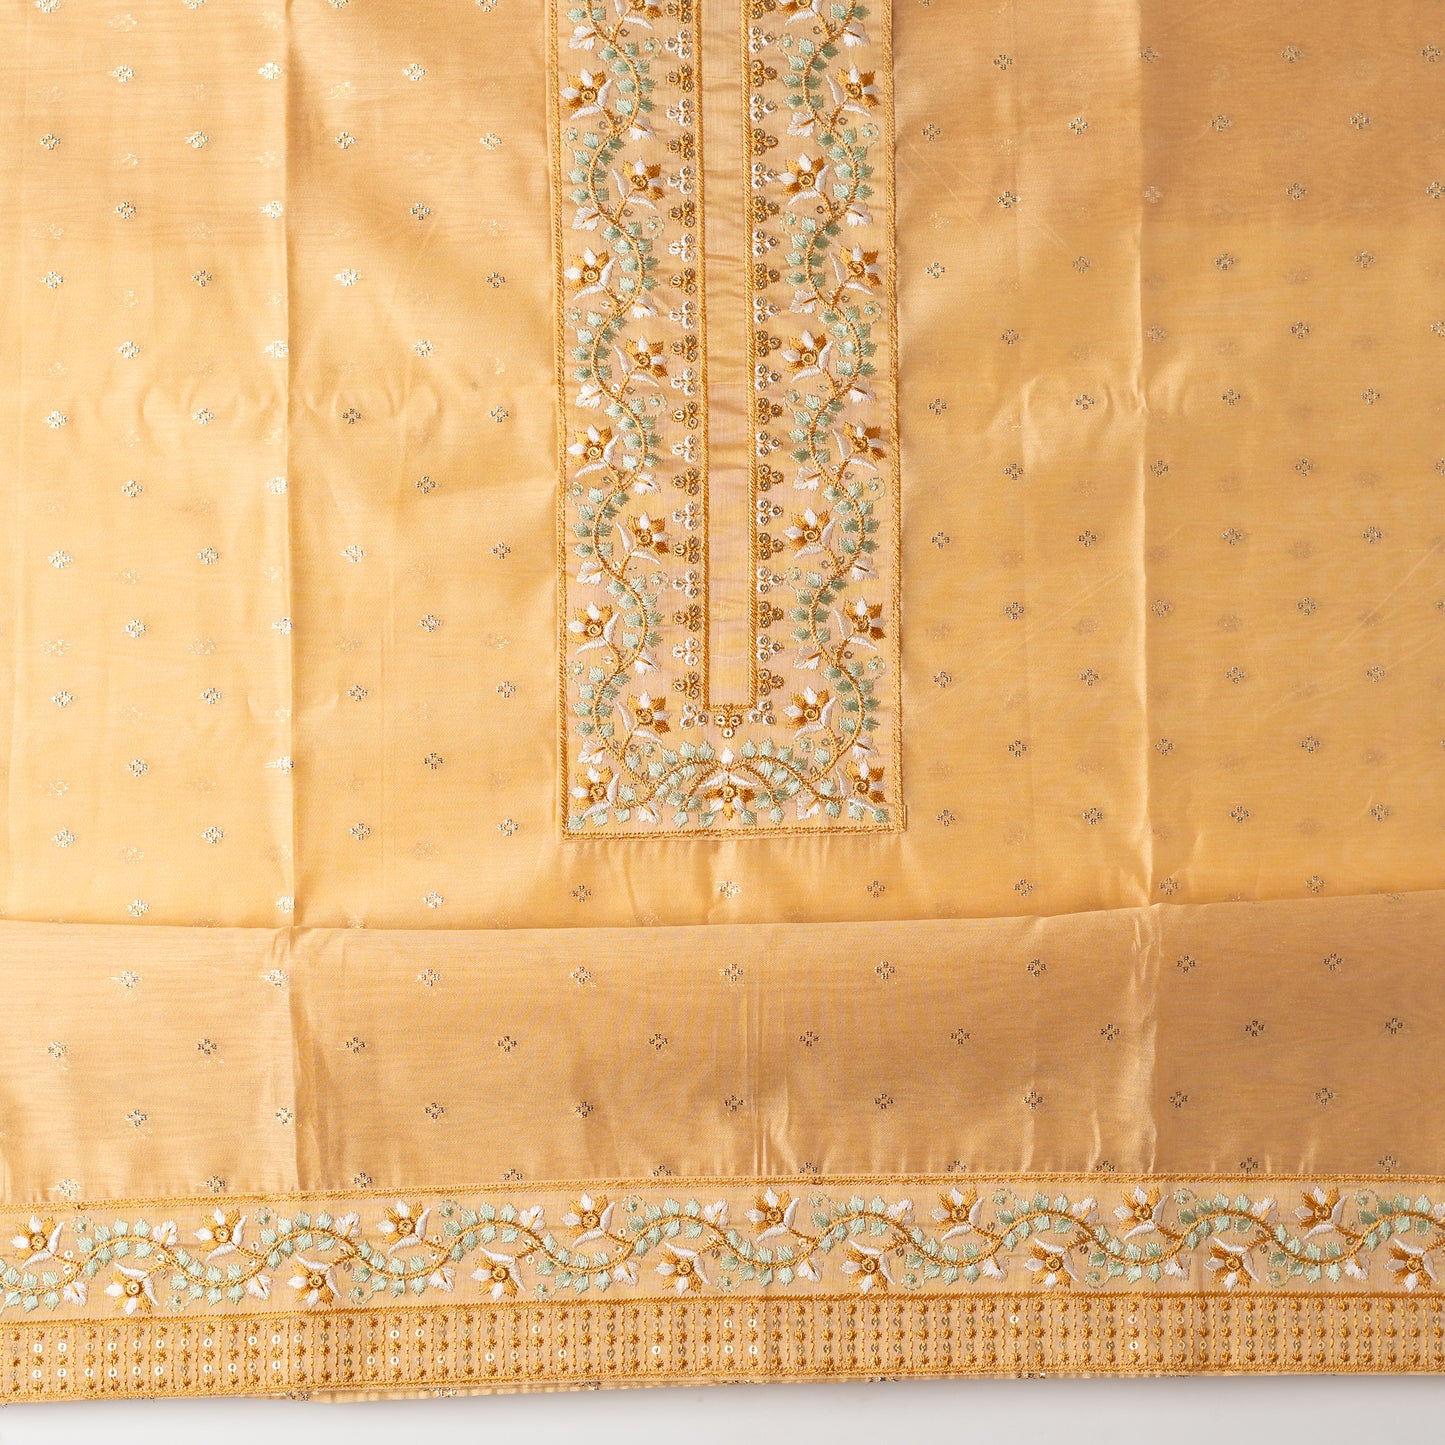 chanderi silk top with nicely crafted embroidery work in neck line, golden color jacquard weaving all over the body, embroidery work on the border of the dress matching the neck line, it has also golden color sequins work in the border